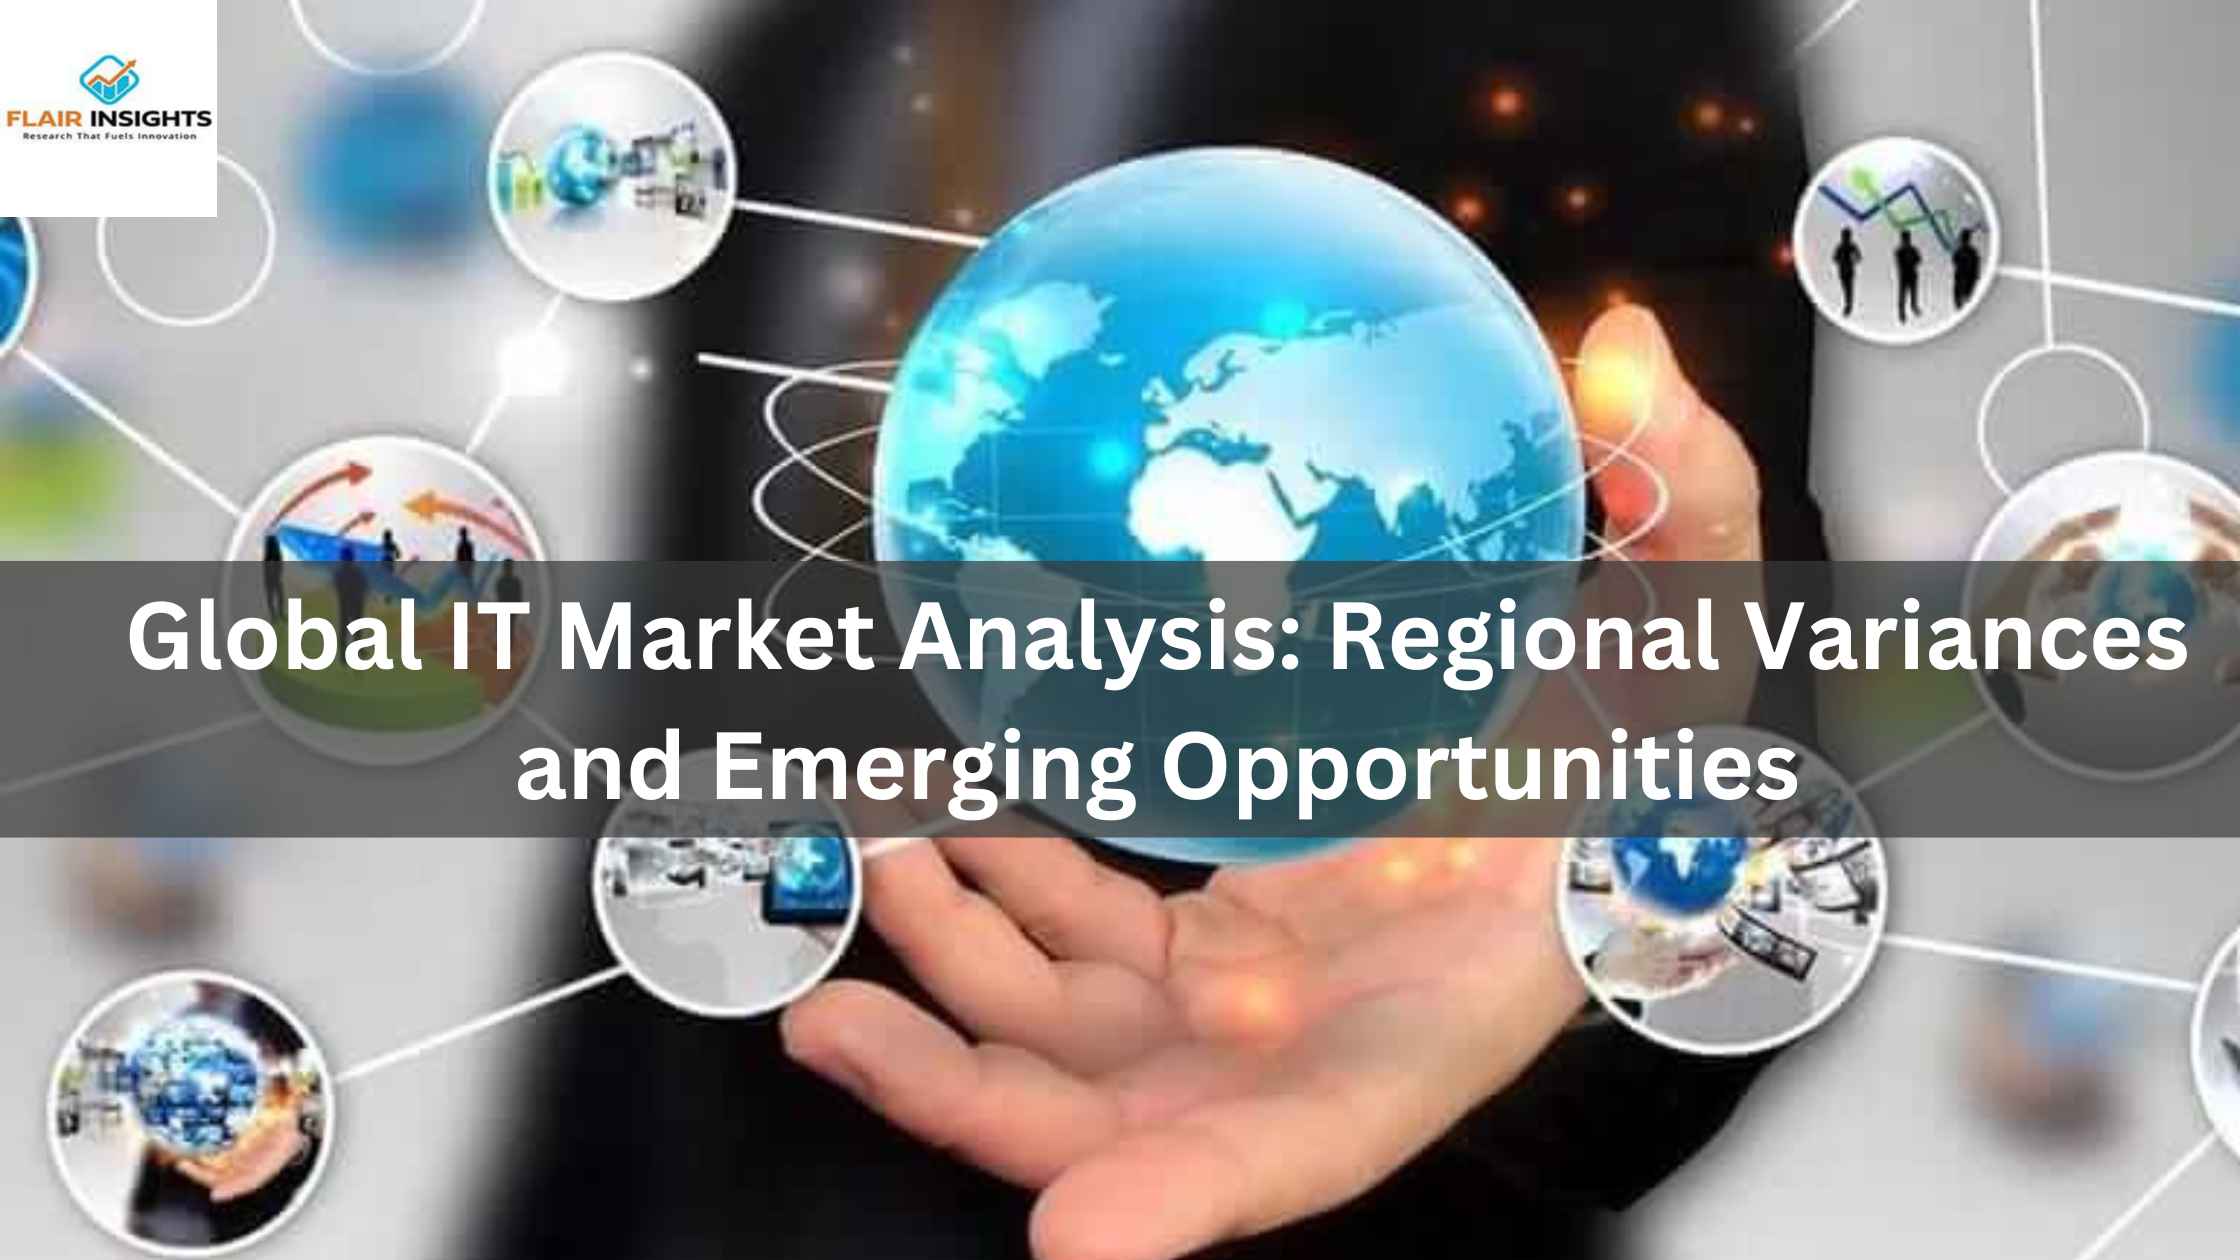 Global IT Market Analysis: Regional Variances and Emerging Opportunities